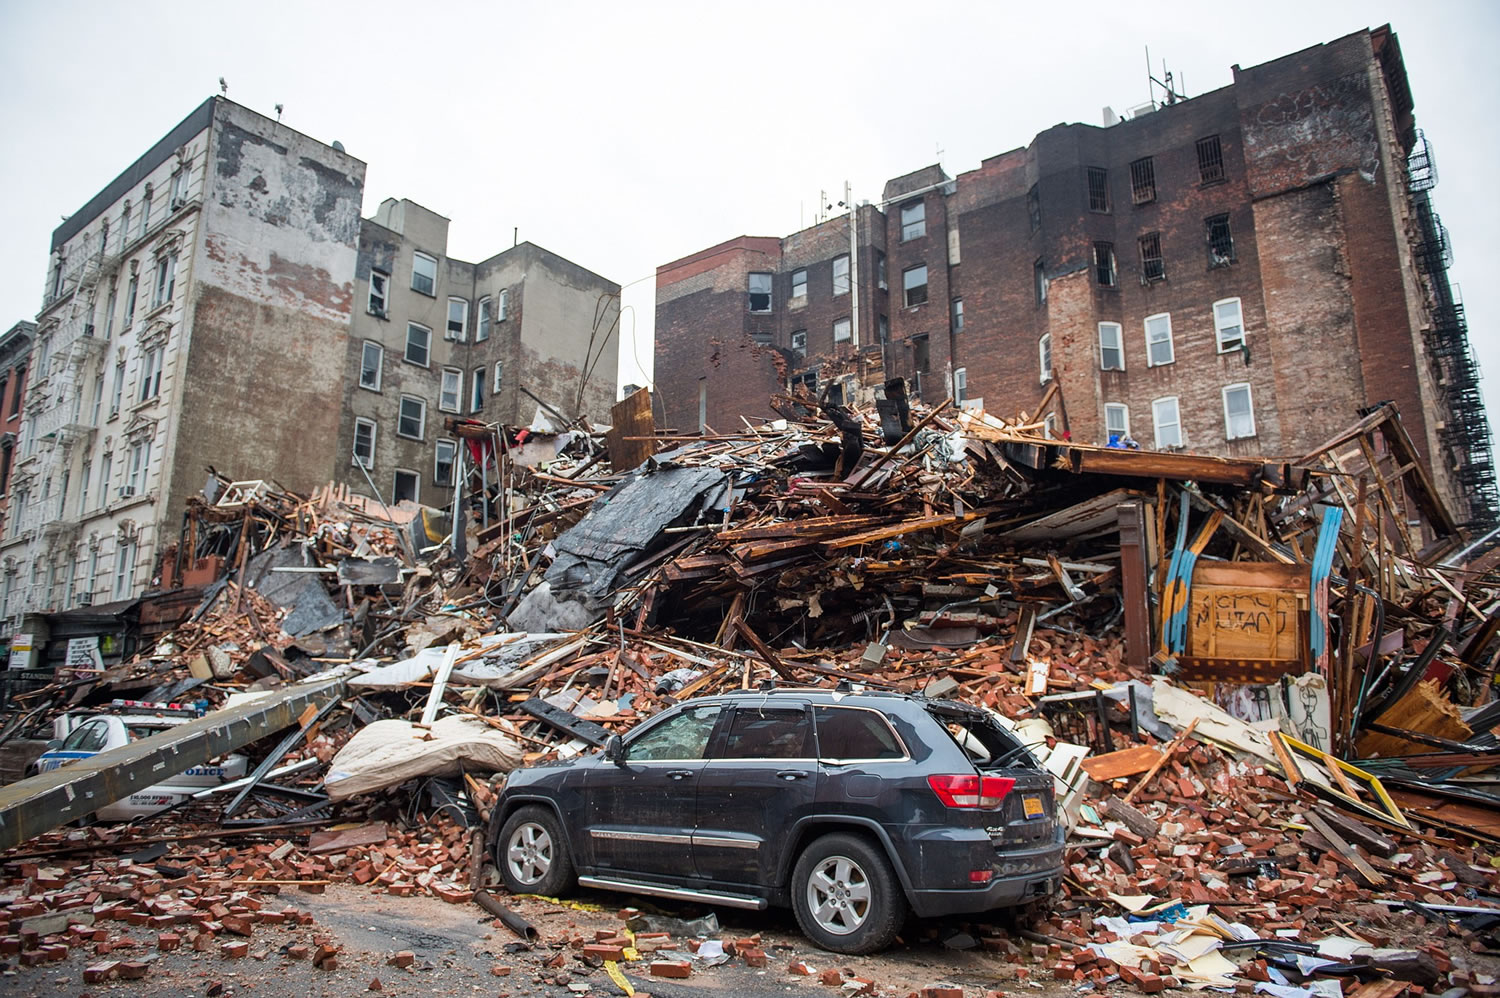 A pile of debris remains at the site of a building explosion in the East Village neighborhood of New York, Friday, March 27, 2015. Nineteen people were injured, four critically, after the powerful blast and fire sent flames soaring and debris flying Thursday afternoon.  Preliminary evidence suggested that a gas explosion amid plumbing and gas work inside the building was to blame.